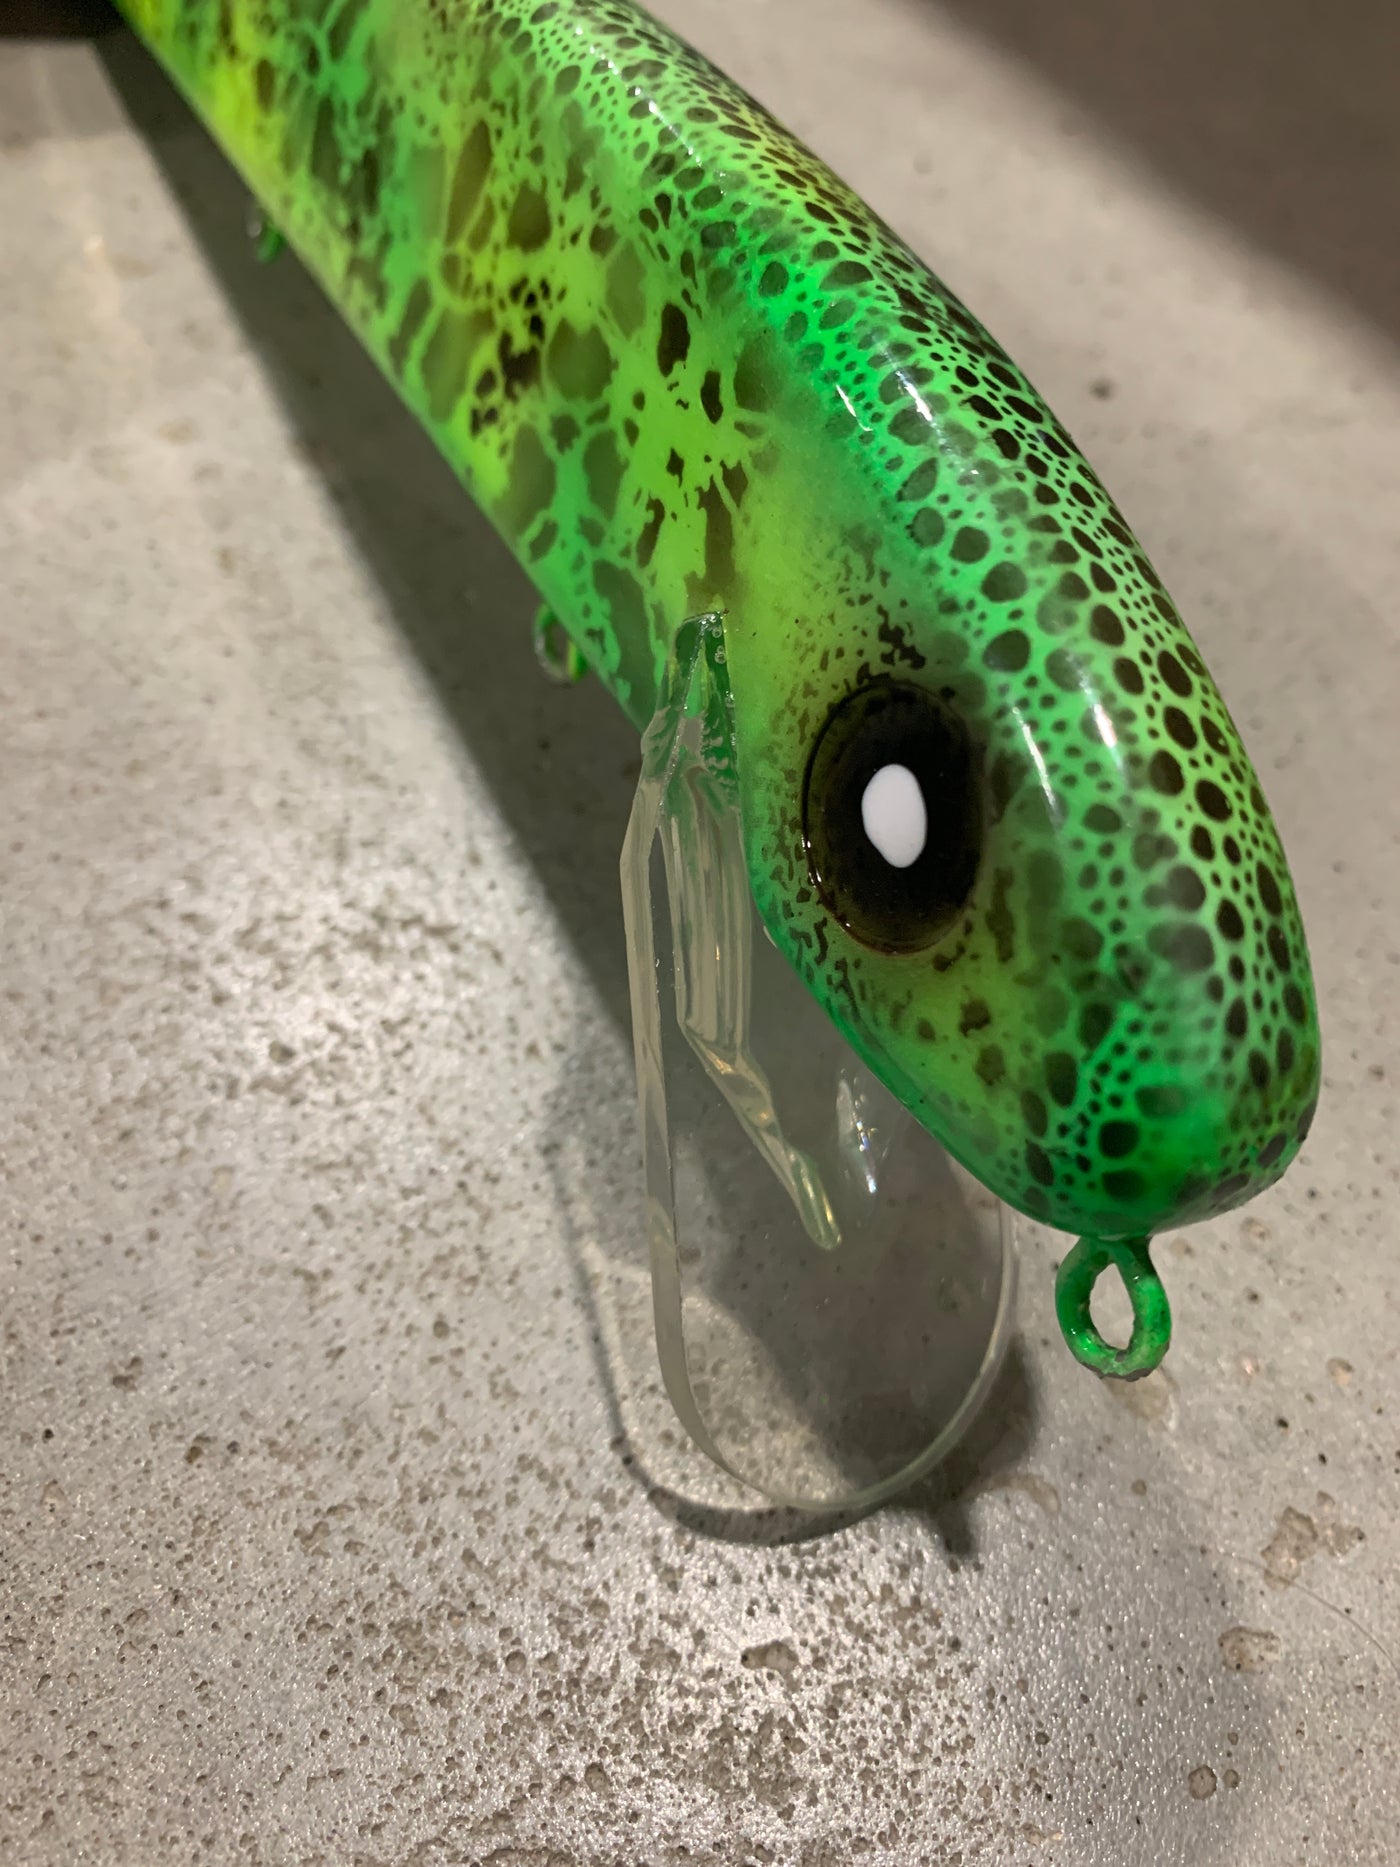 Musky Lures